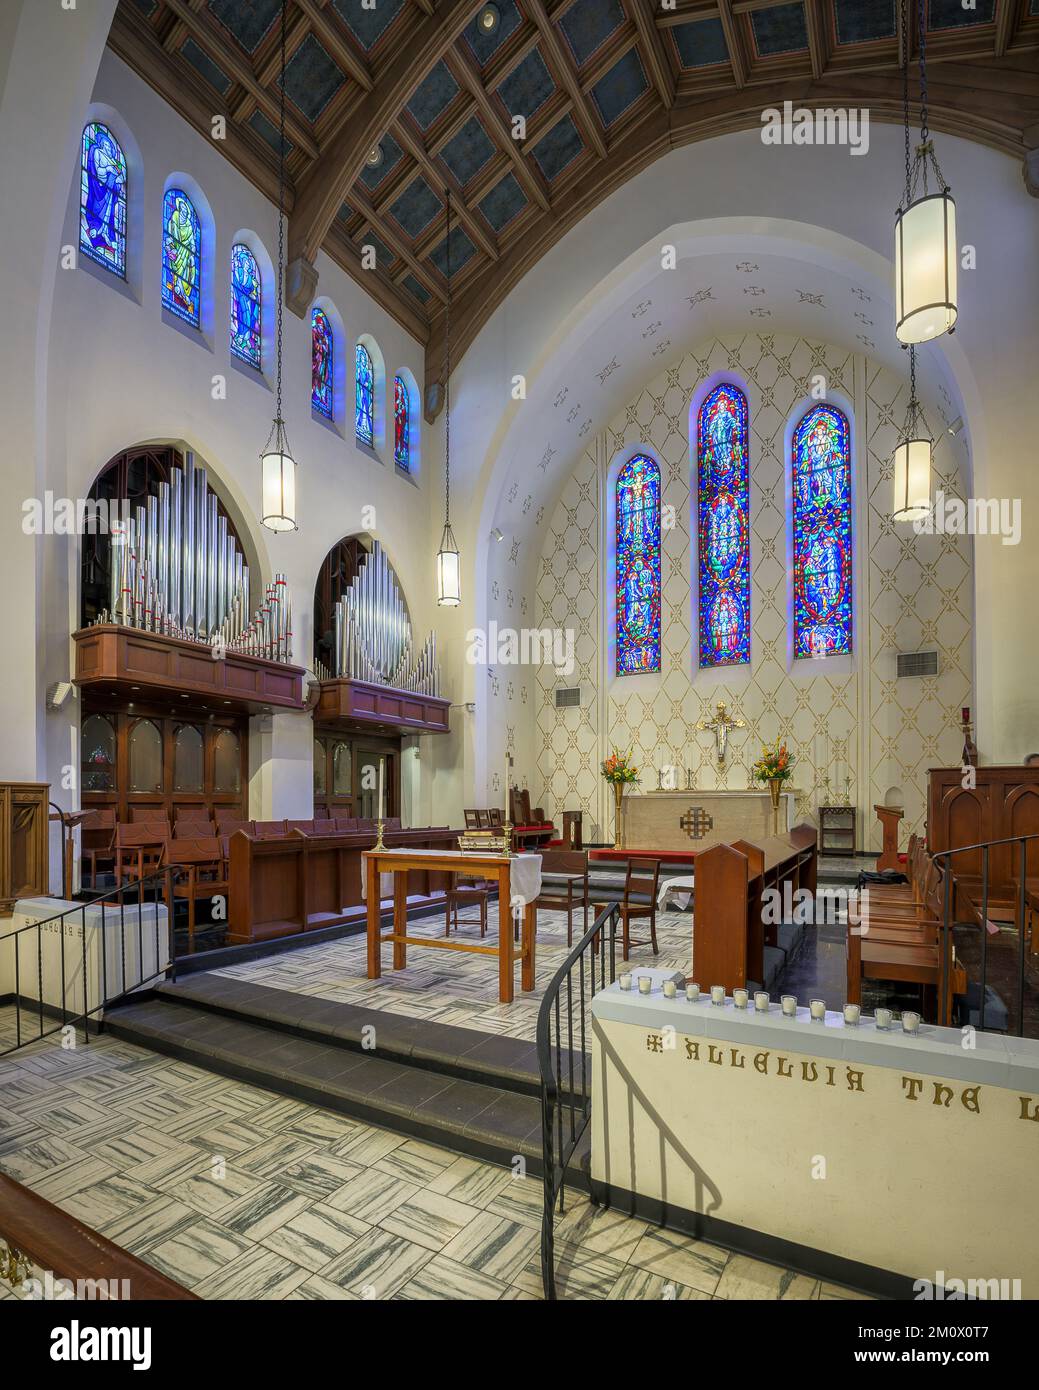 Sanctuary and altar at the historic Cathedral of St. John in downtown Albuquerque, New Mexico Stock Photo